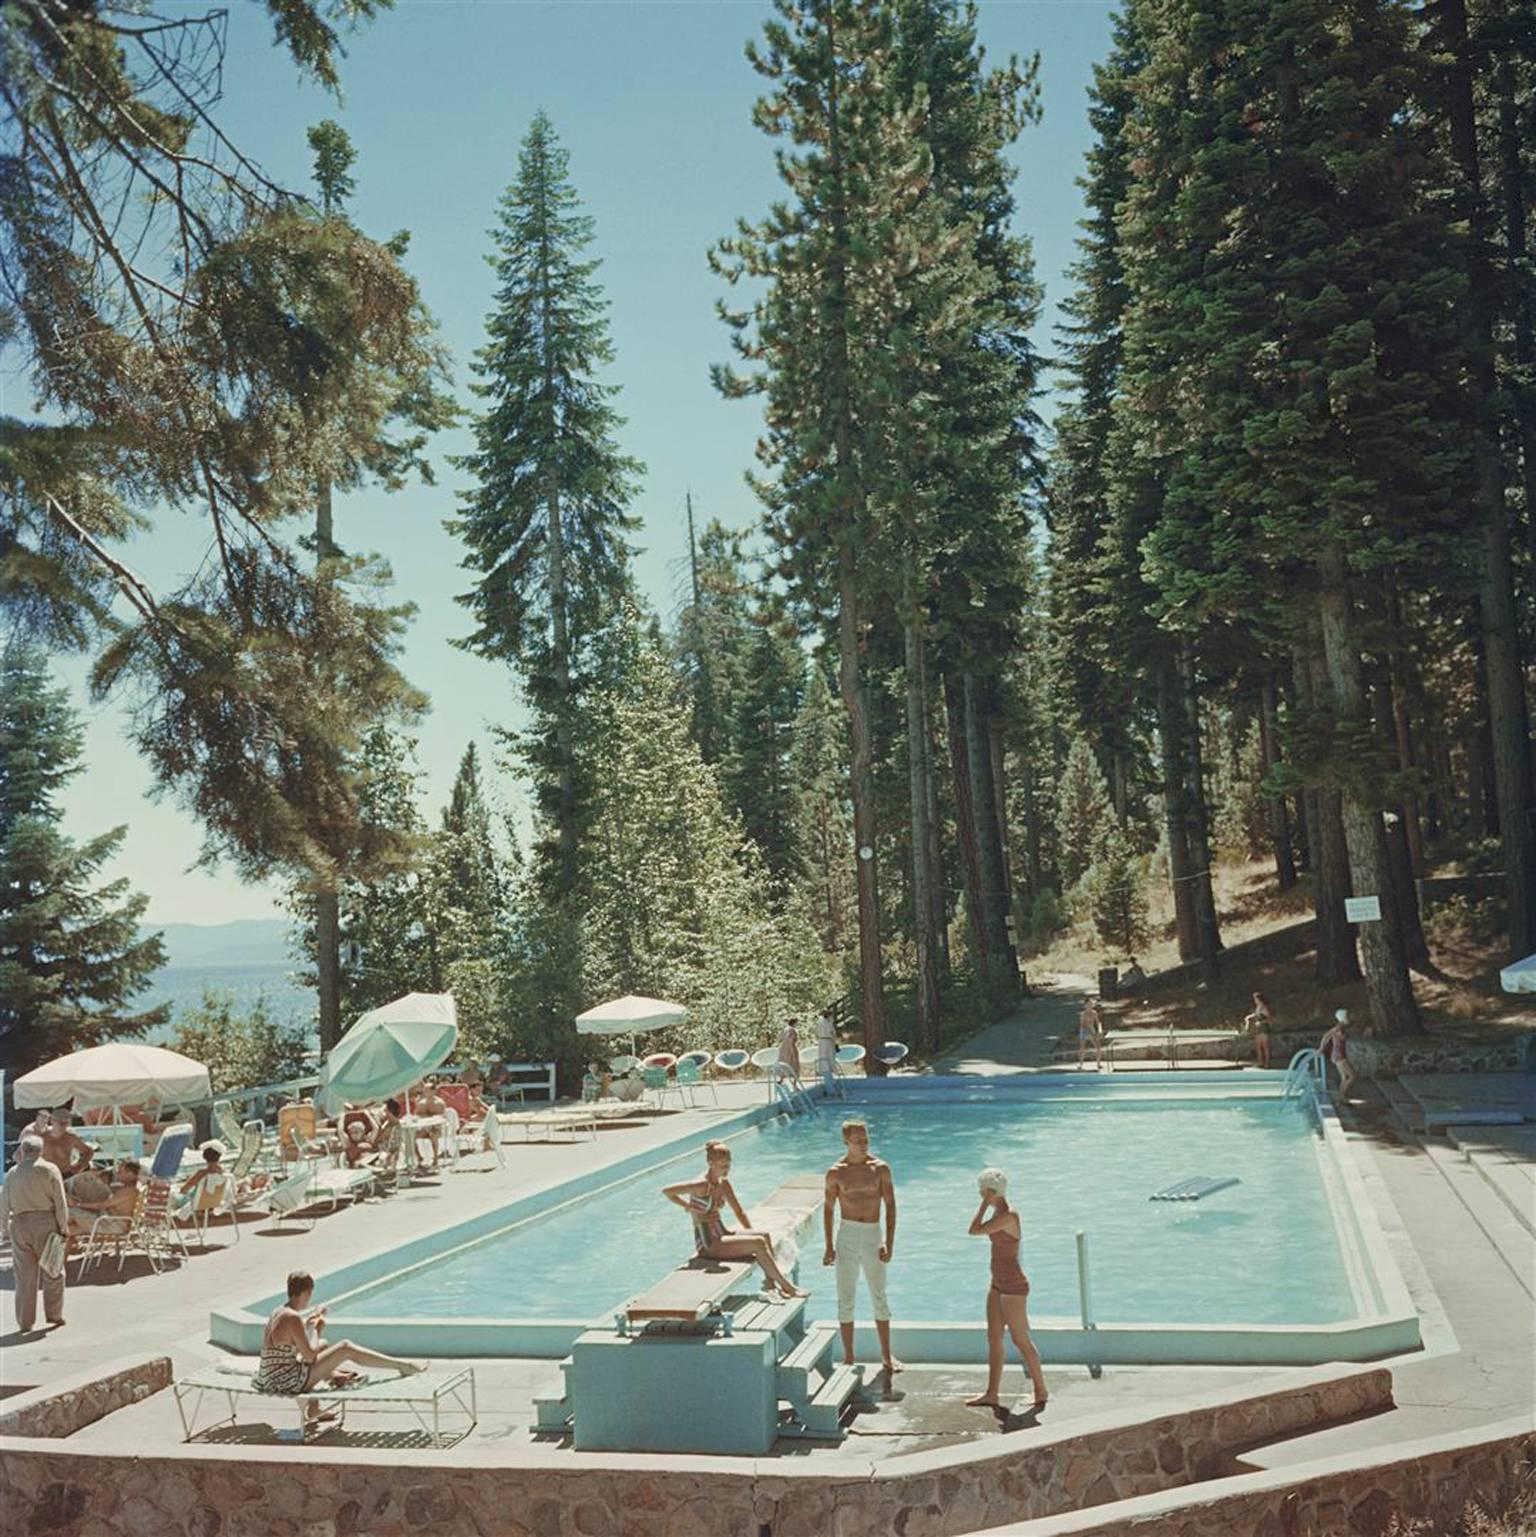 Bathers by a pool on the shore of Lake Tahoe, California, 1959. 
Fashionable bathers relax underneath parasols and on sun loungers beside the swimming pool, overlooking Lake Tahoe on a beautiful sunny day.

Typically 'Slim Beach' this photograph